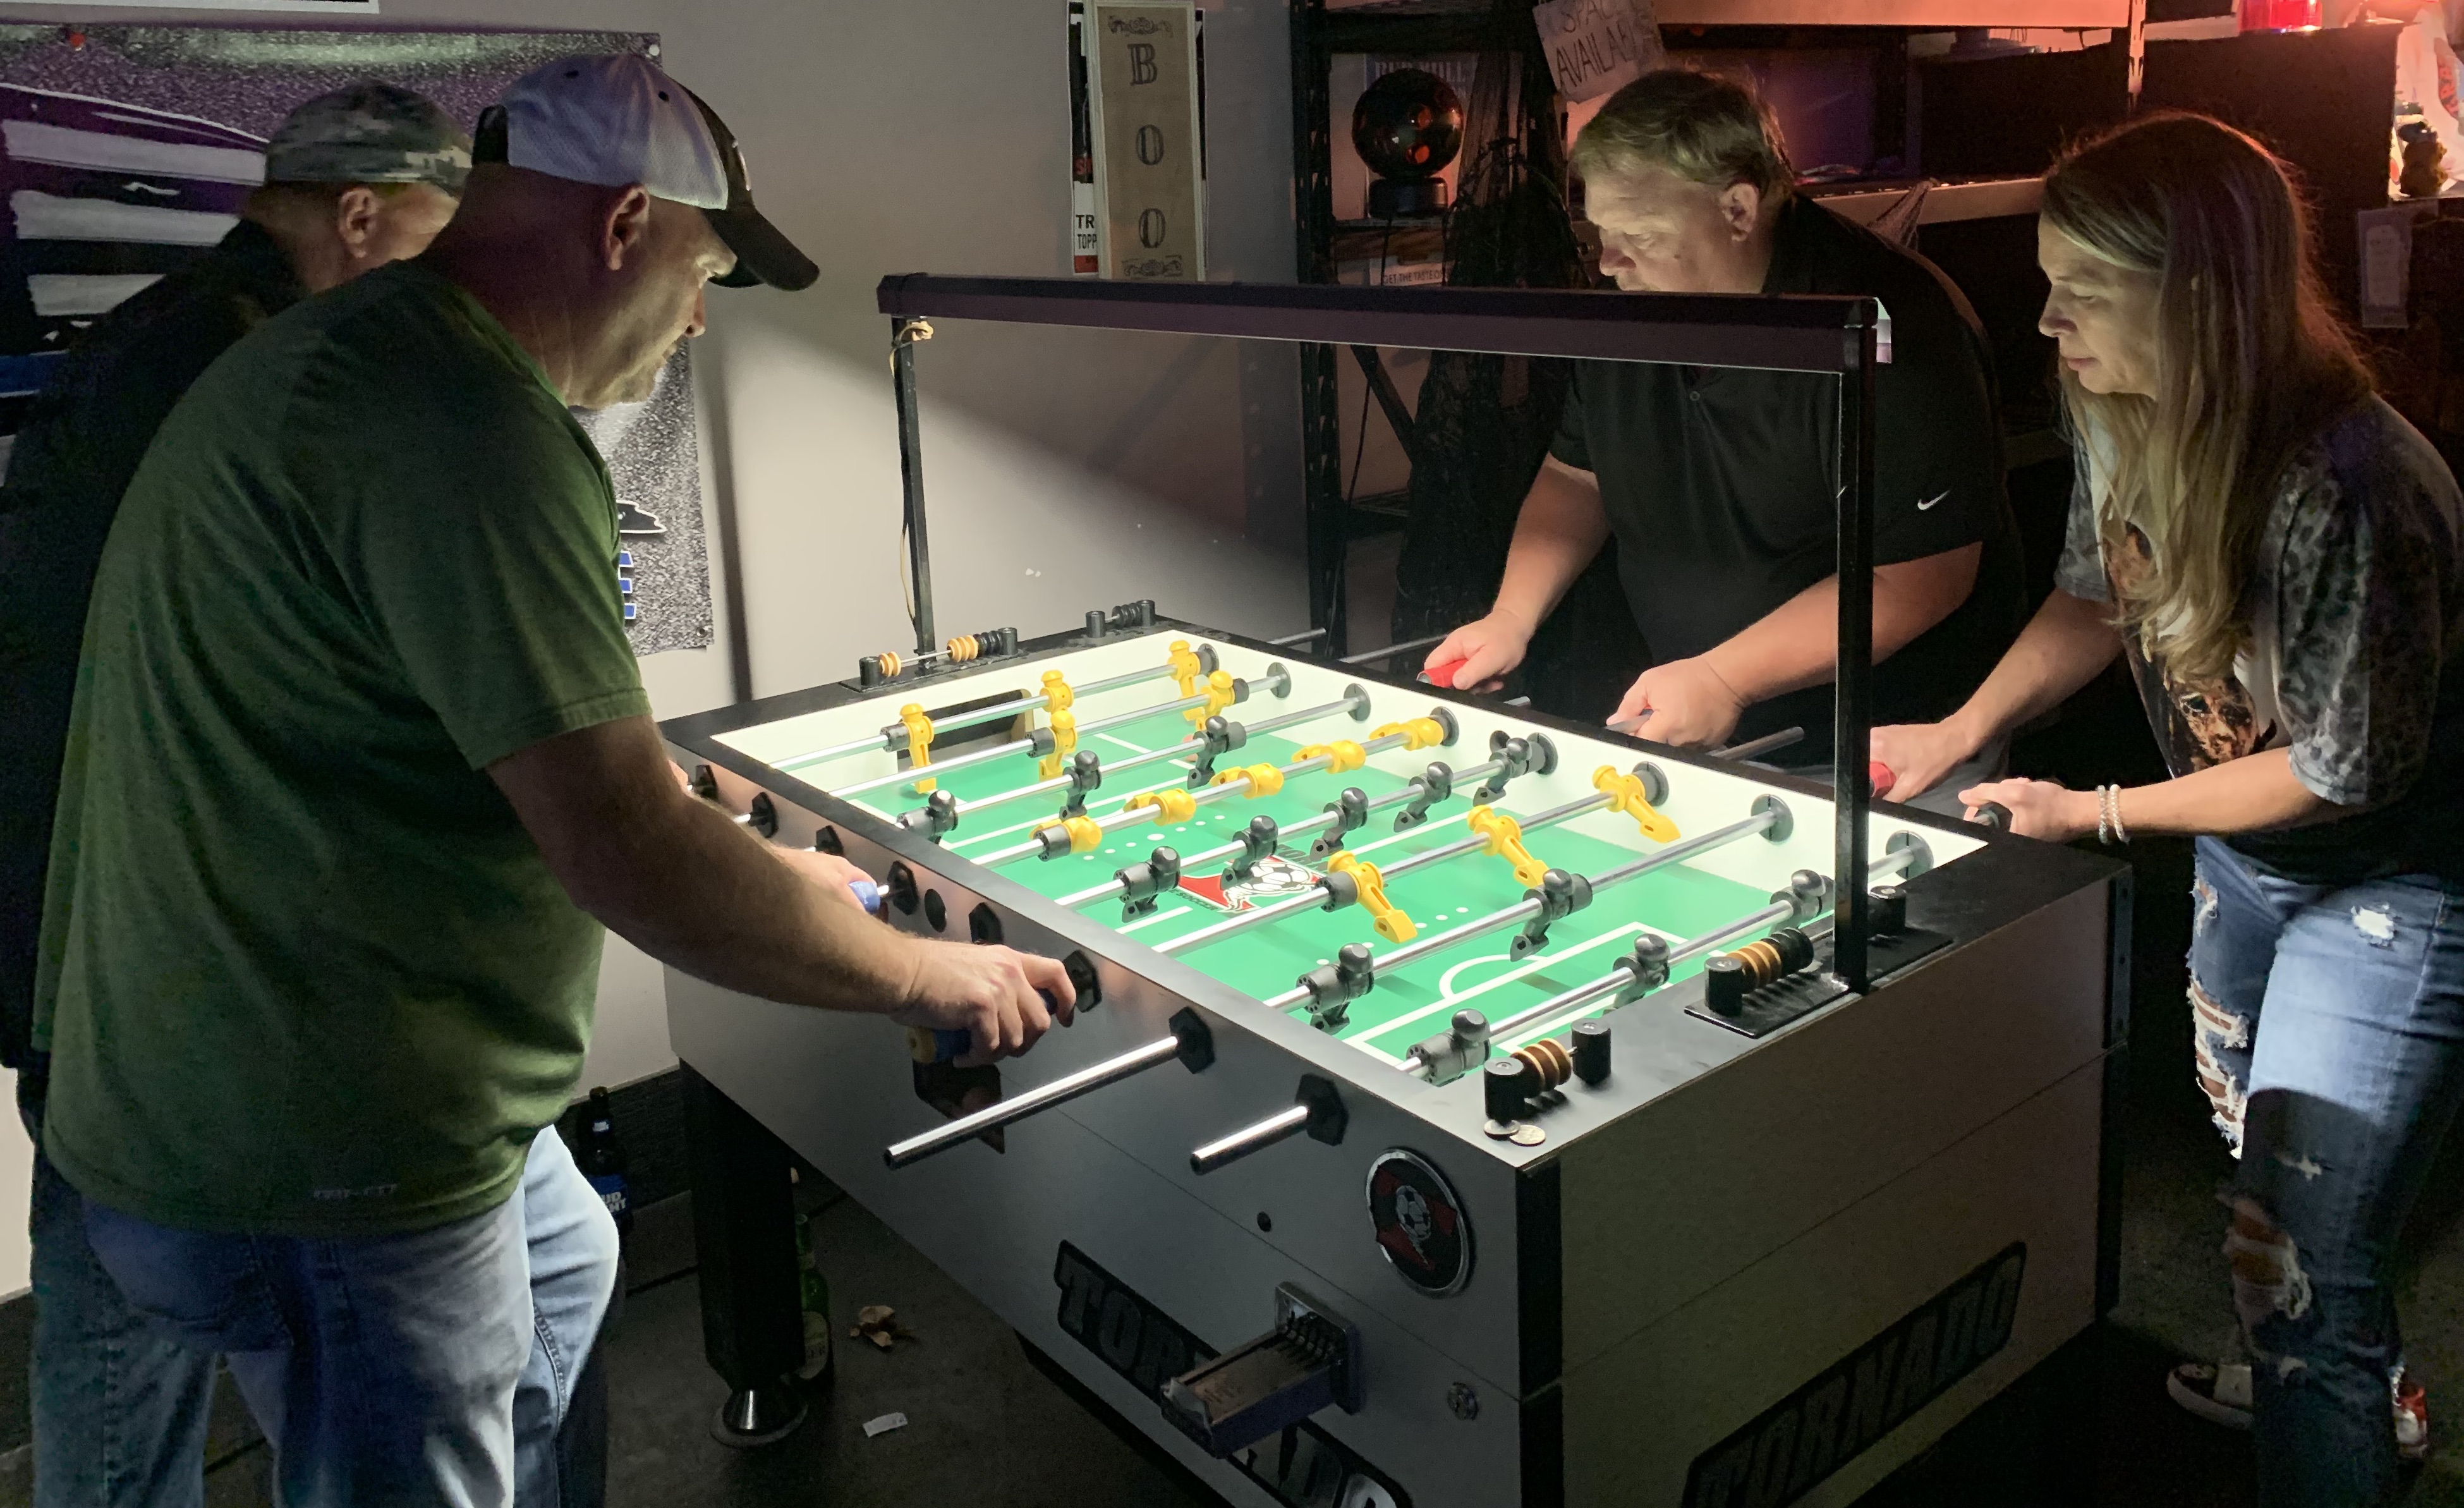 A championship match for the title of the 1st of a series of $200 Added! Foos-Friday events held at VanÕs Bar in Leeds,AL. this October 28 2022. Steve Dodgen & Mike Camp won the tournament while Bill McBurnett & Kelly Parrett were runners-up.